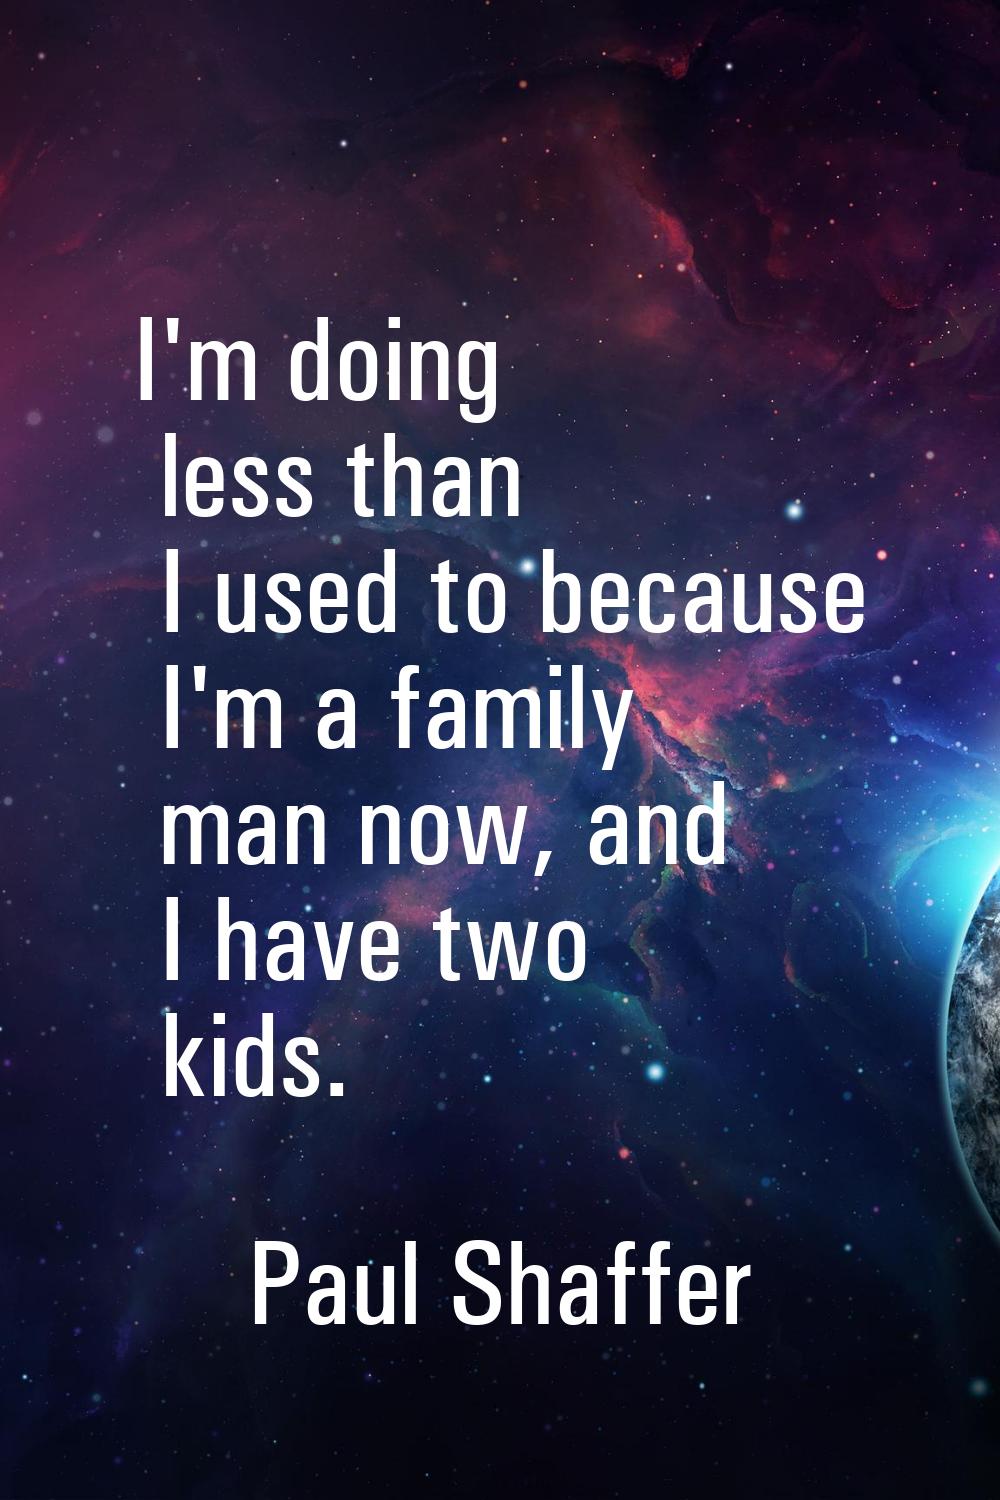 I'm doing less than I used to because I'm a family man now, and I have two kids.